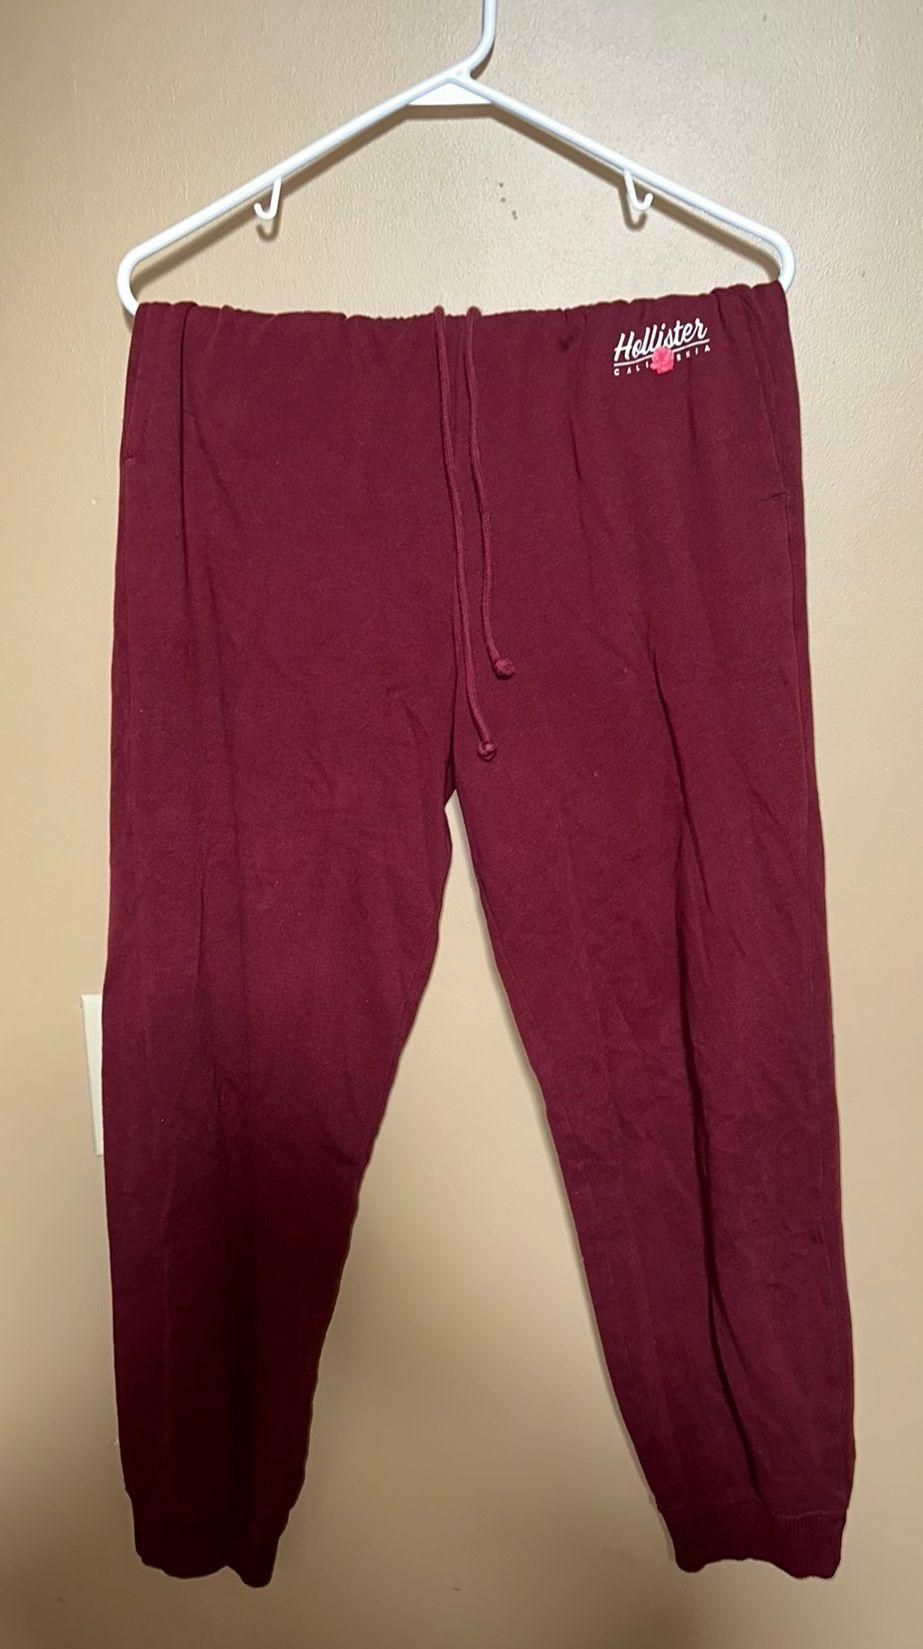 Hollister Sweatpants Red - $4 (85% Off Retail) - From Morgan